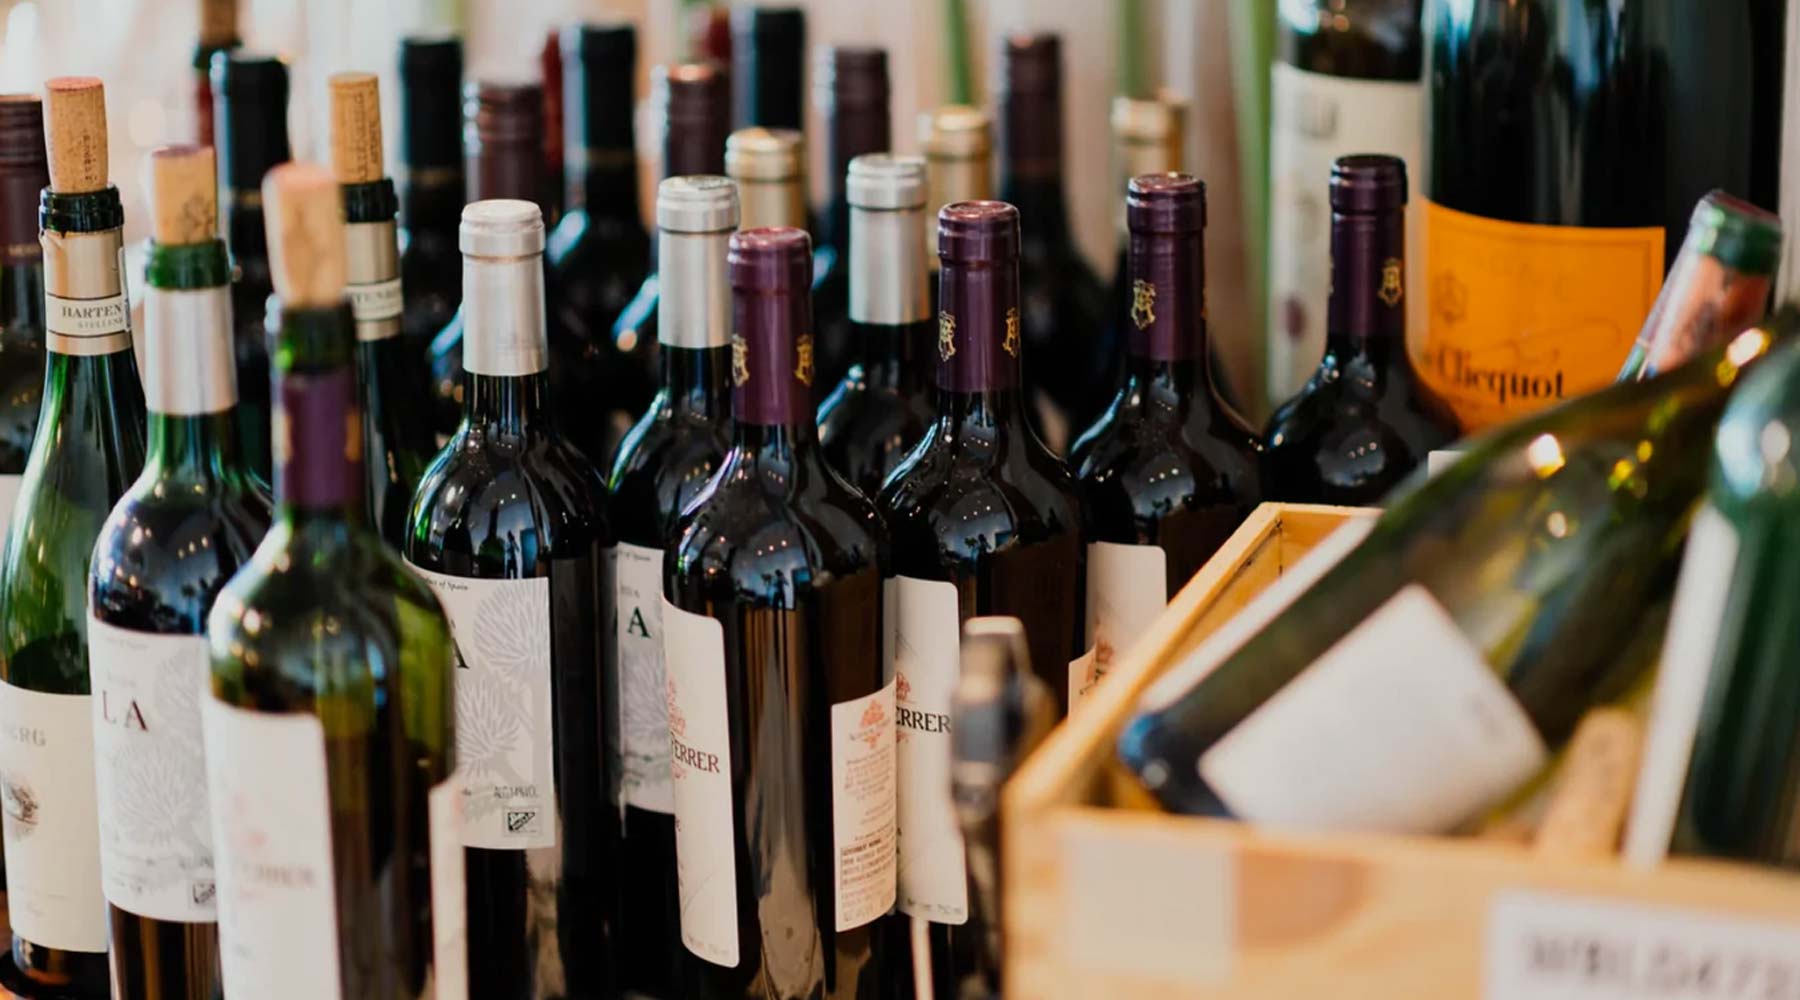 5 Quick Tricks to Find Your Next Favorite Bottle of Wine